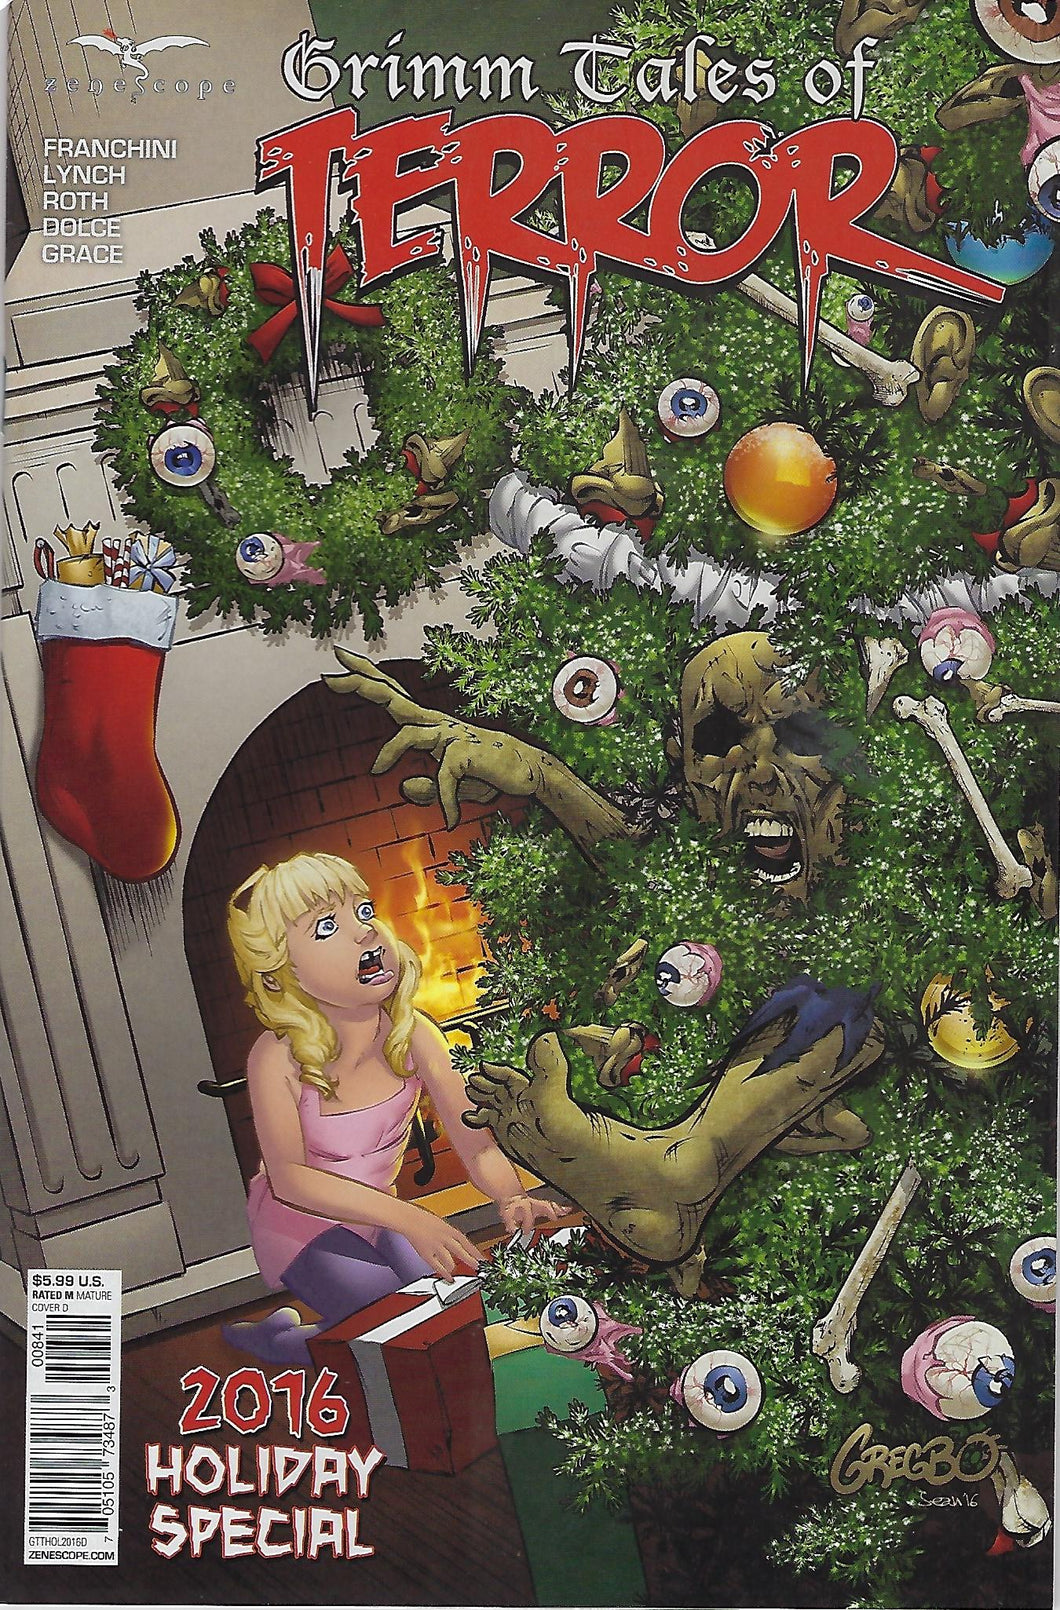 GRIMM TALES OF TERROR 2016 HOLIDAY SPECIAL WATSON COVER 